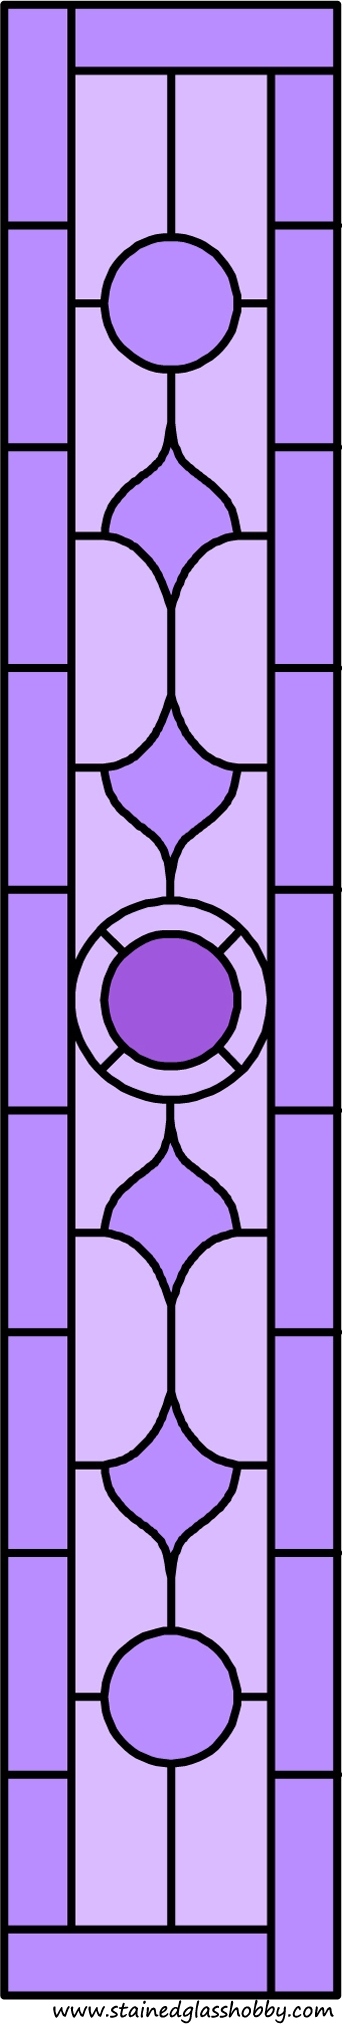 Rectangular panel for stained glass design 2